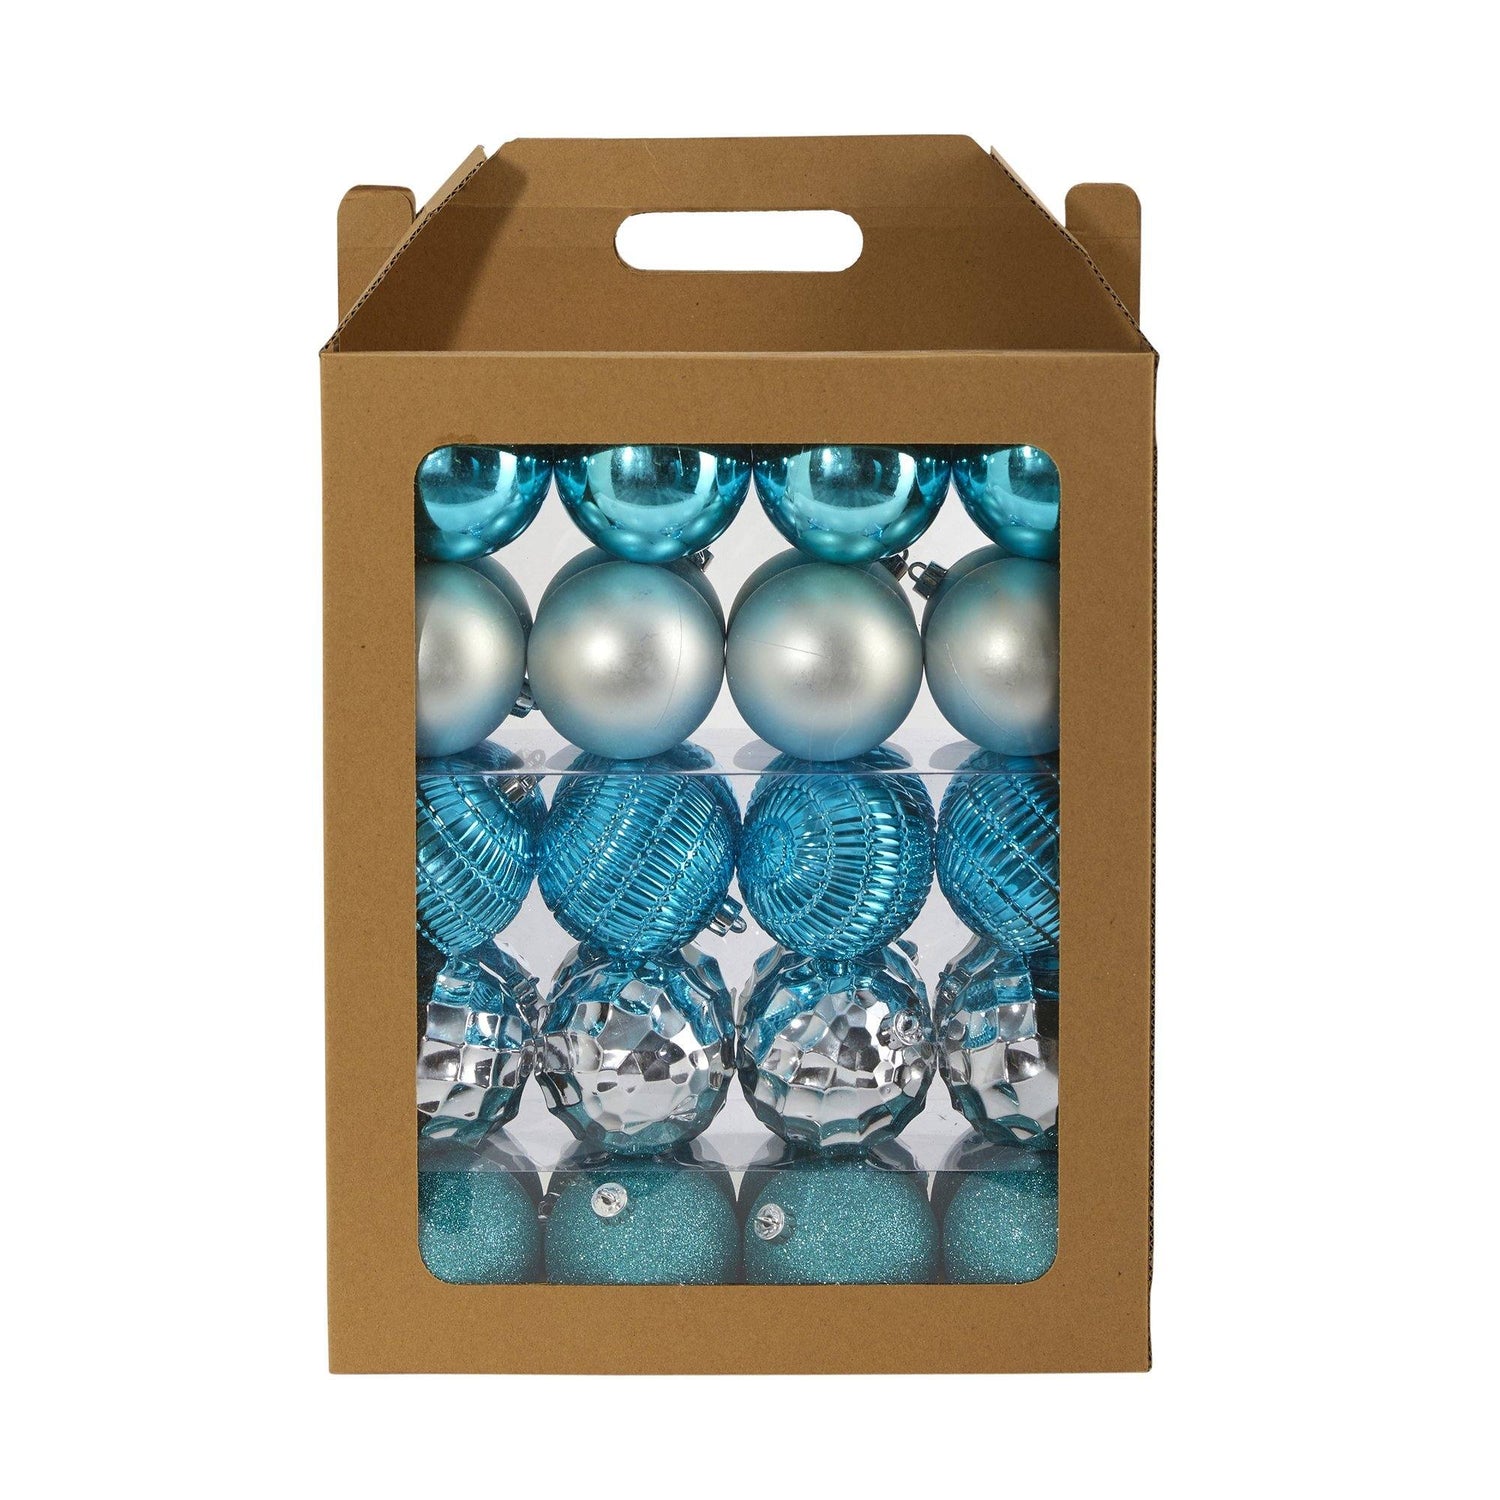 Holiday Shatterproof, 40 Count Christmas Tree Ornament Box Set, 80mm with Re-Useable Box